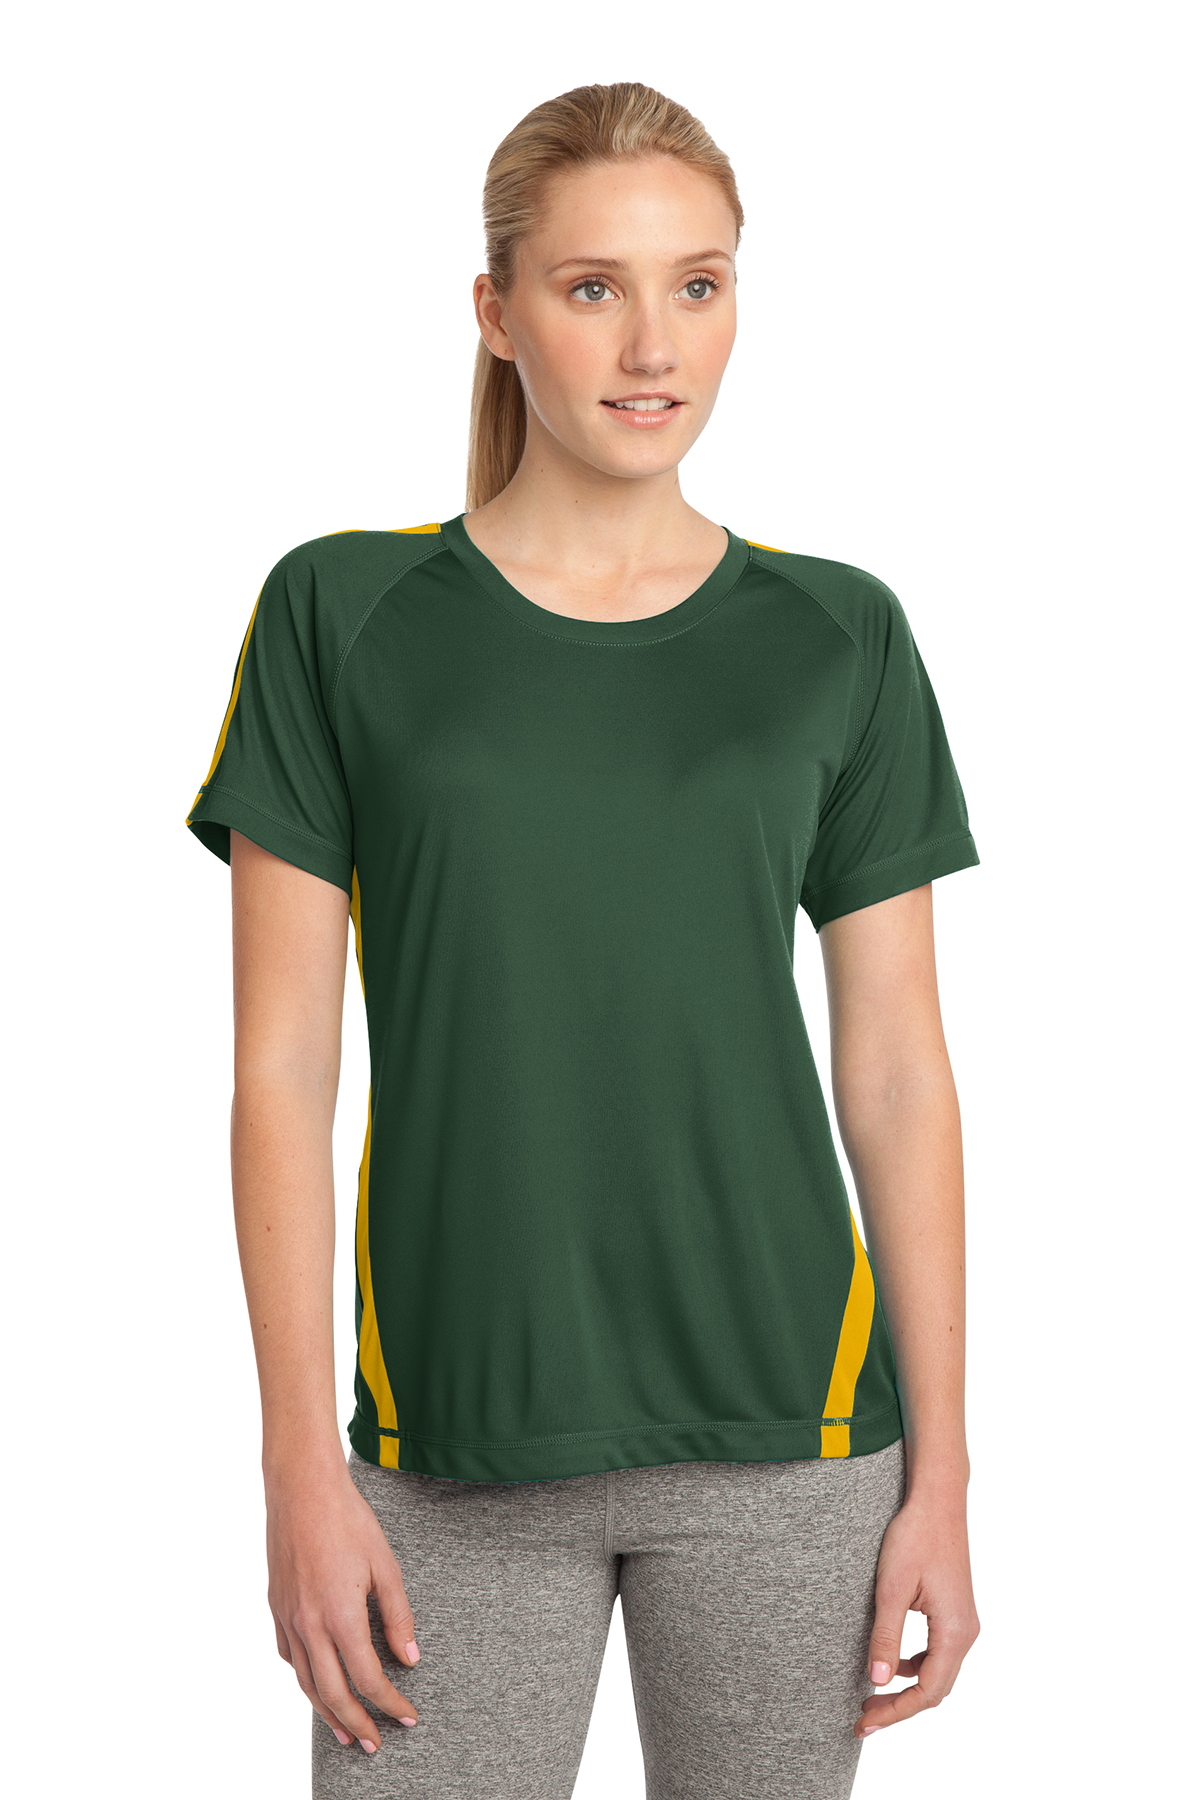 click to view Forest Green/Gold